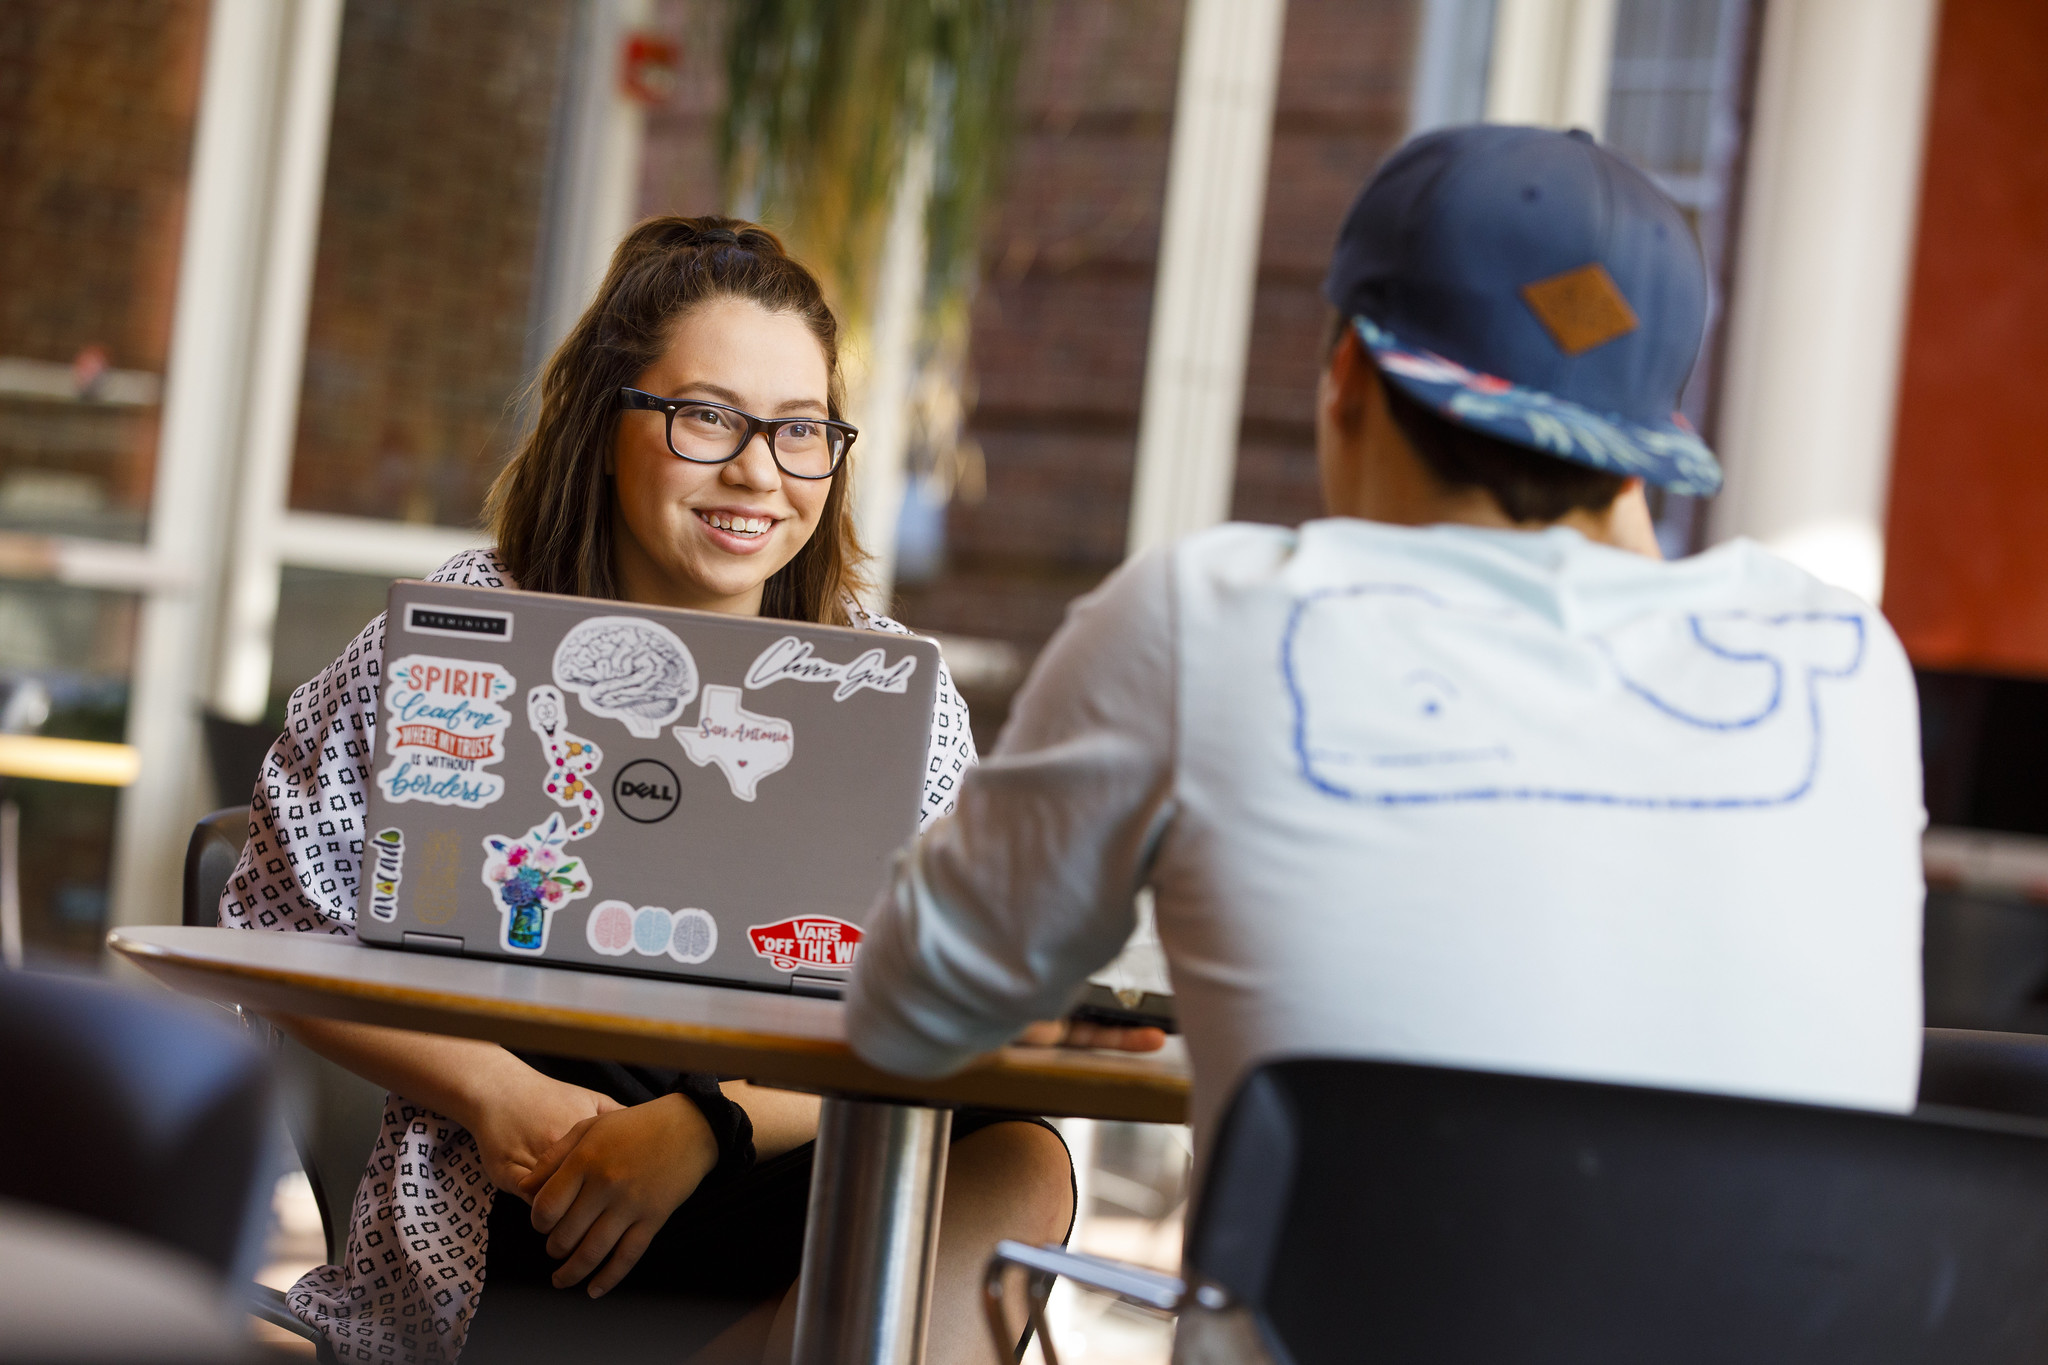 Students Talking at a table with computer in front of them